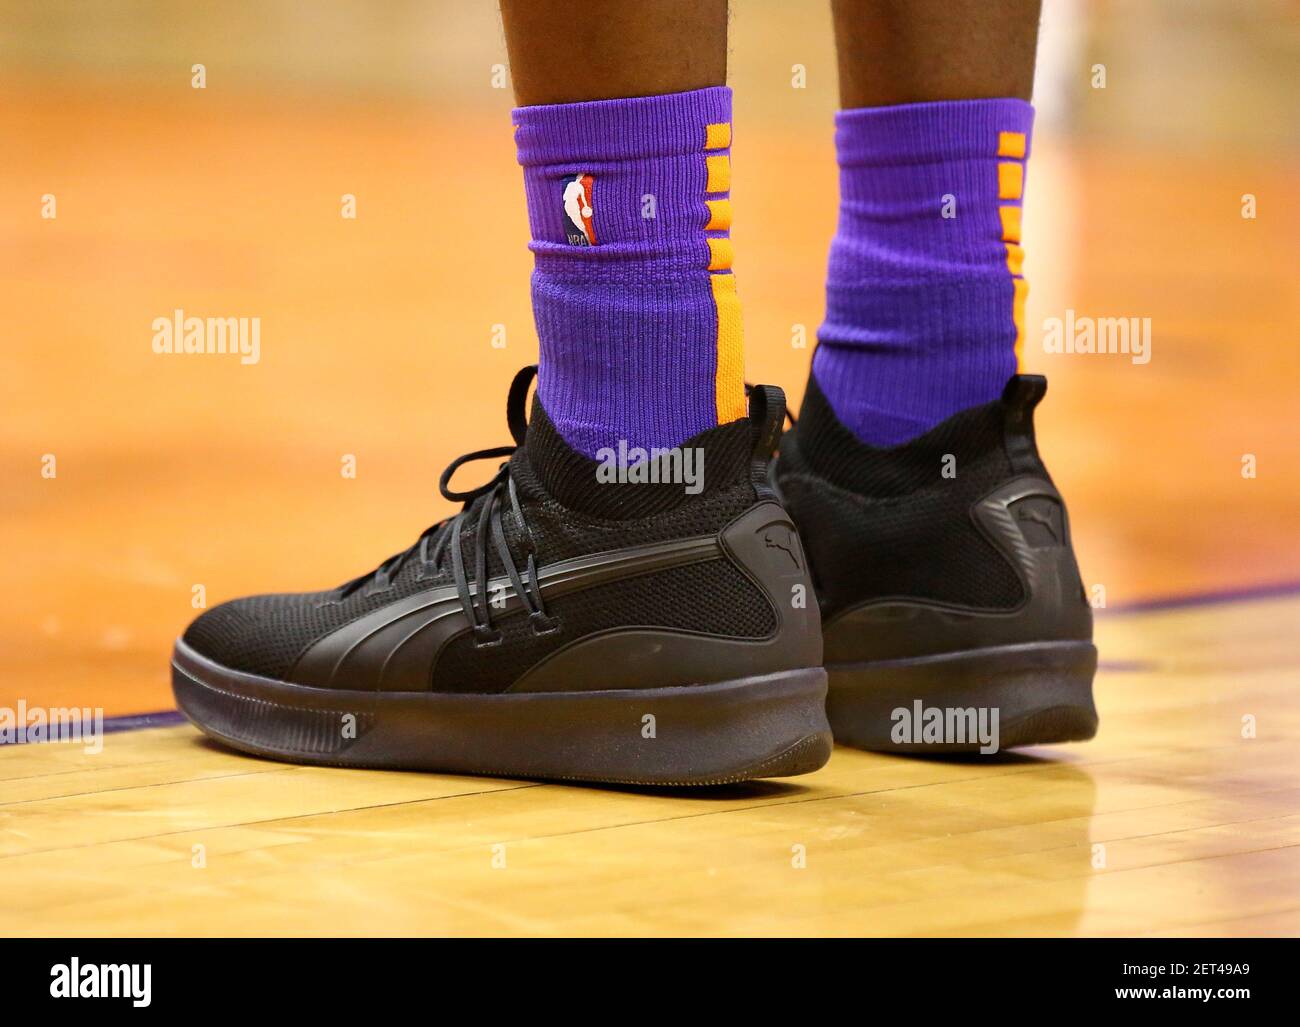 Nov 30, 2018; Phoenix, AZ, USA; Detailed view of the Puma basketball shoes  worn by Phoenix Suns center Deandre Ayton (22) against the Orlando Magic in  the first half at Talking Stick